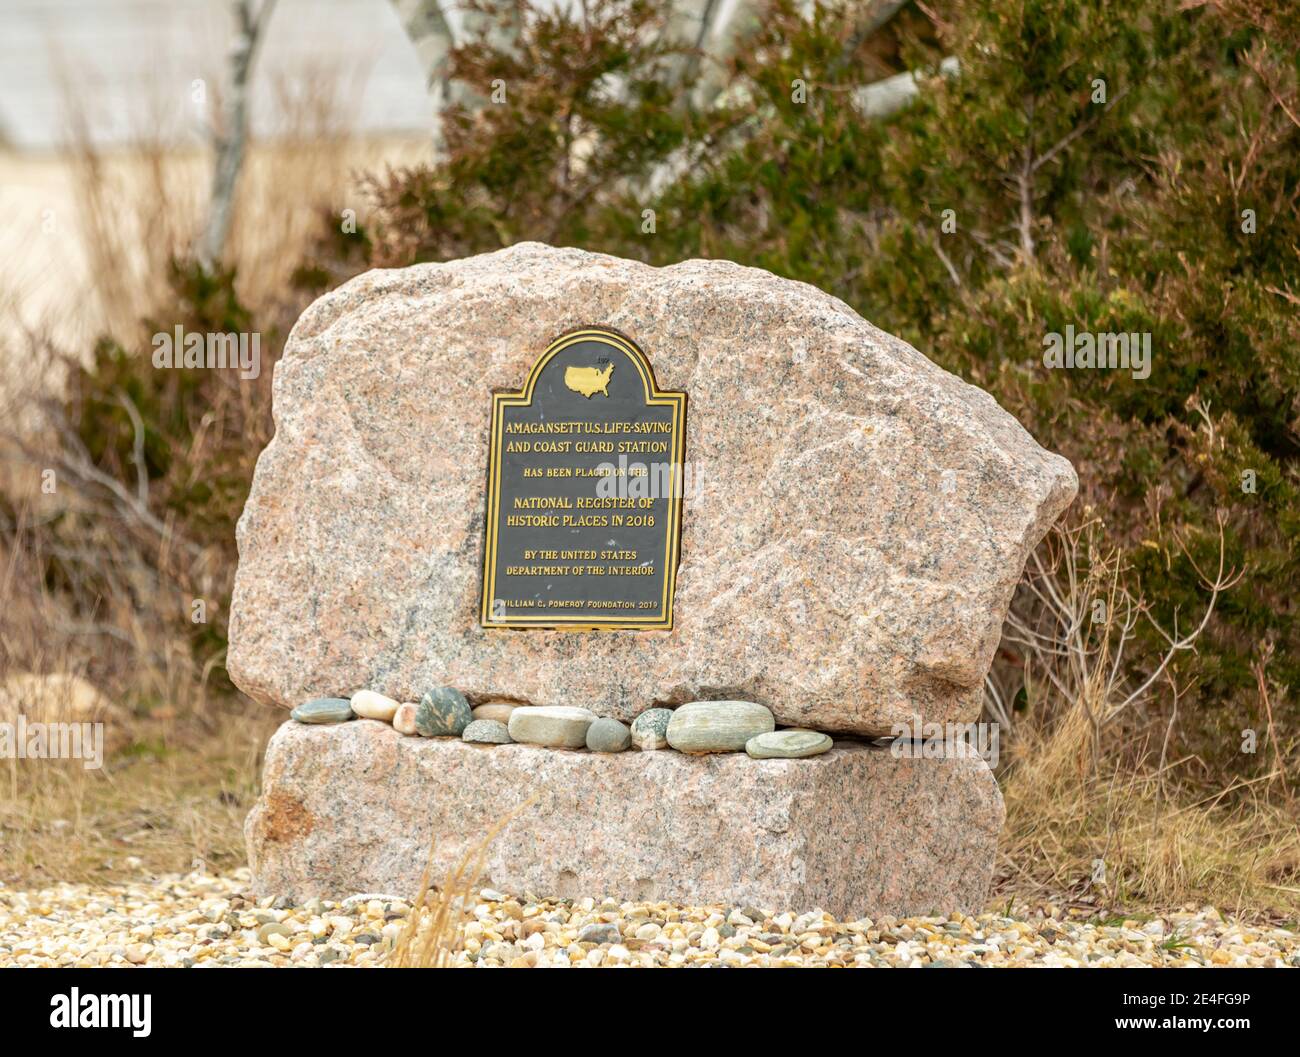 Amagansett US Life-Saving and Coast Guard Station plaque and monument Stock Photo